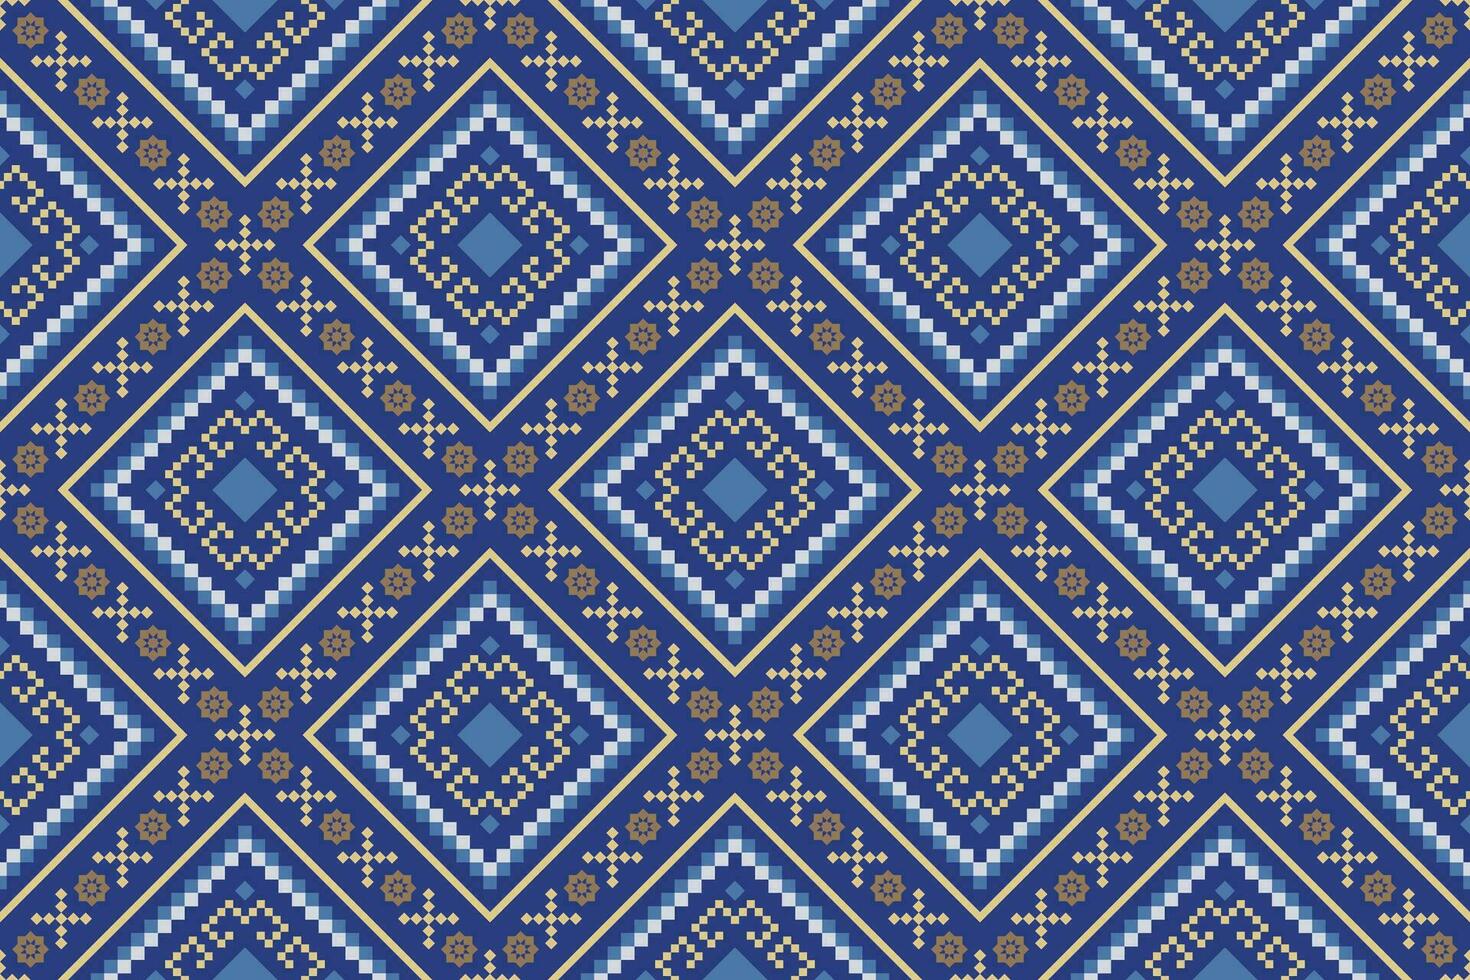 Indigo navy blue geometric traditional ethnic pattern Ikat seamless pattern abstract design for fabric print cloth dress carpet curtains and sarong Aztec African Indian Indonesian vector